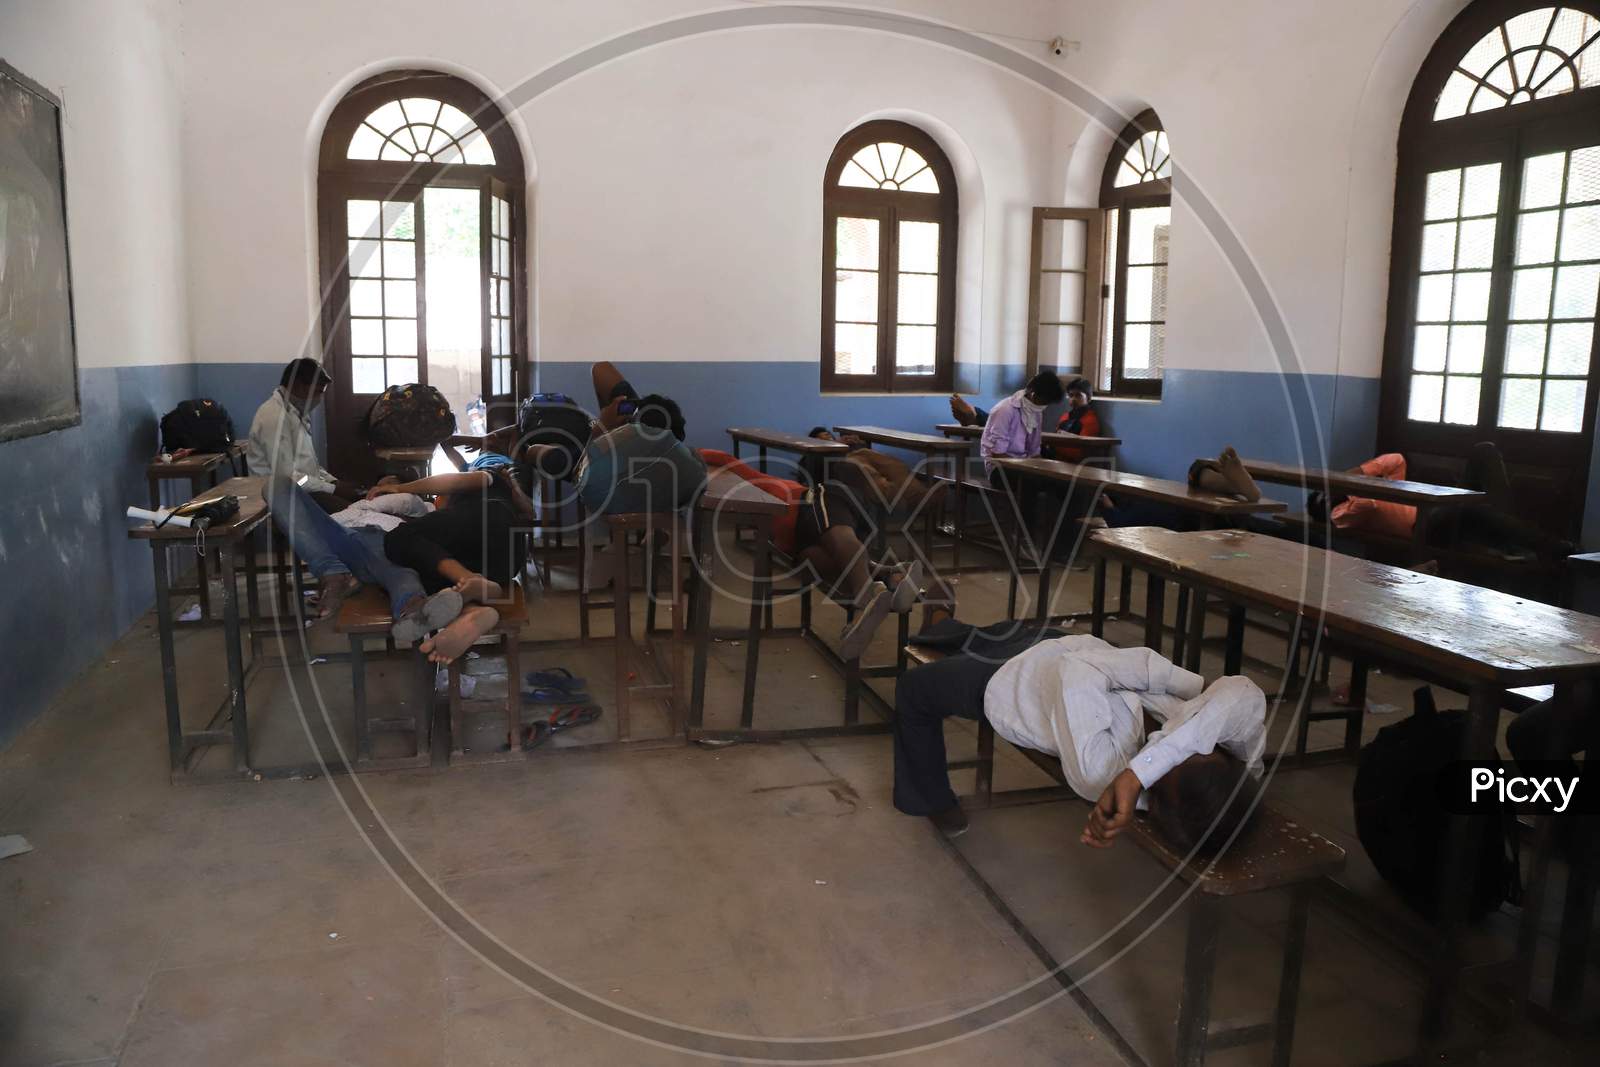 Migrant Workers Who Arrived From Madhya Pradesh Rest In a School Arranged by Government Officials During Nationwide Lockdown Amidst Coronavirus Or COVID-19 Pandemic in Prayagraj